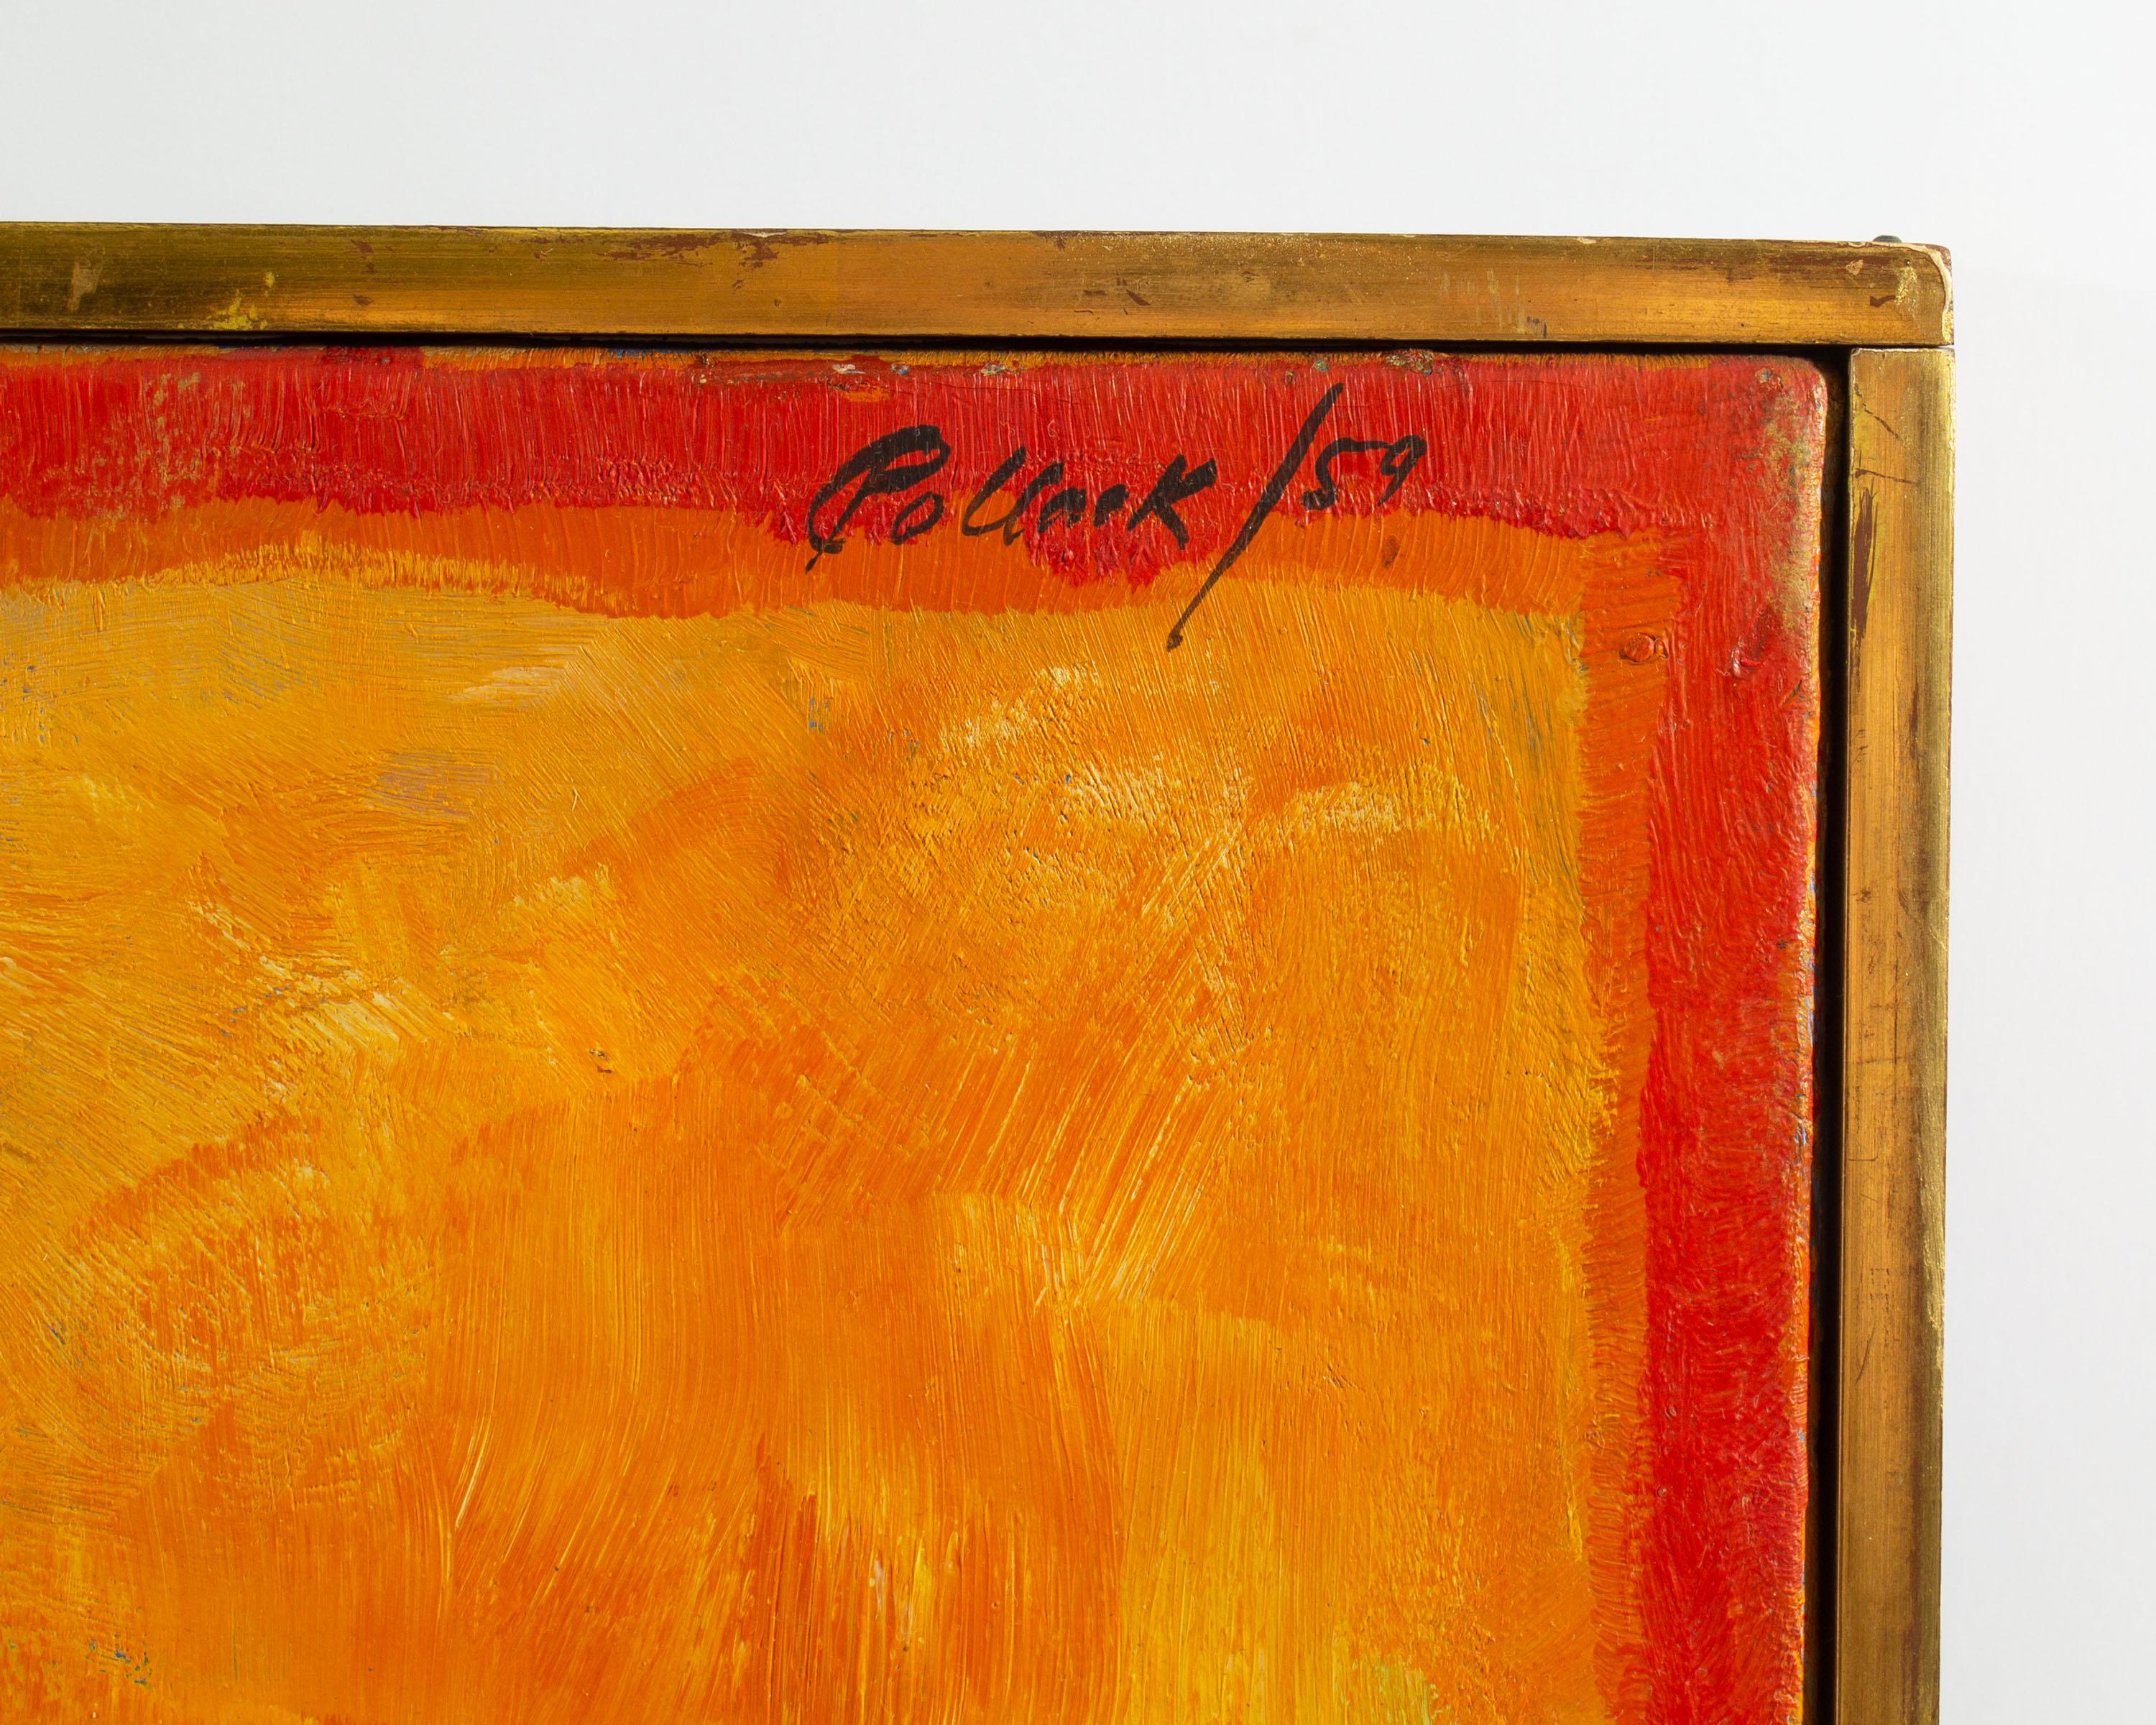 A signed oil on canvas abstract painting by the American artist Reginald Murray Pollack (1924-2001). Dated 1959, the painting features an abstract interior scene replete with paintings and colorful tabletop arrangements. A vibrant deep orange with a